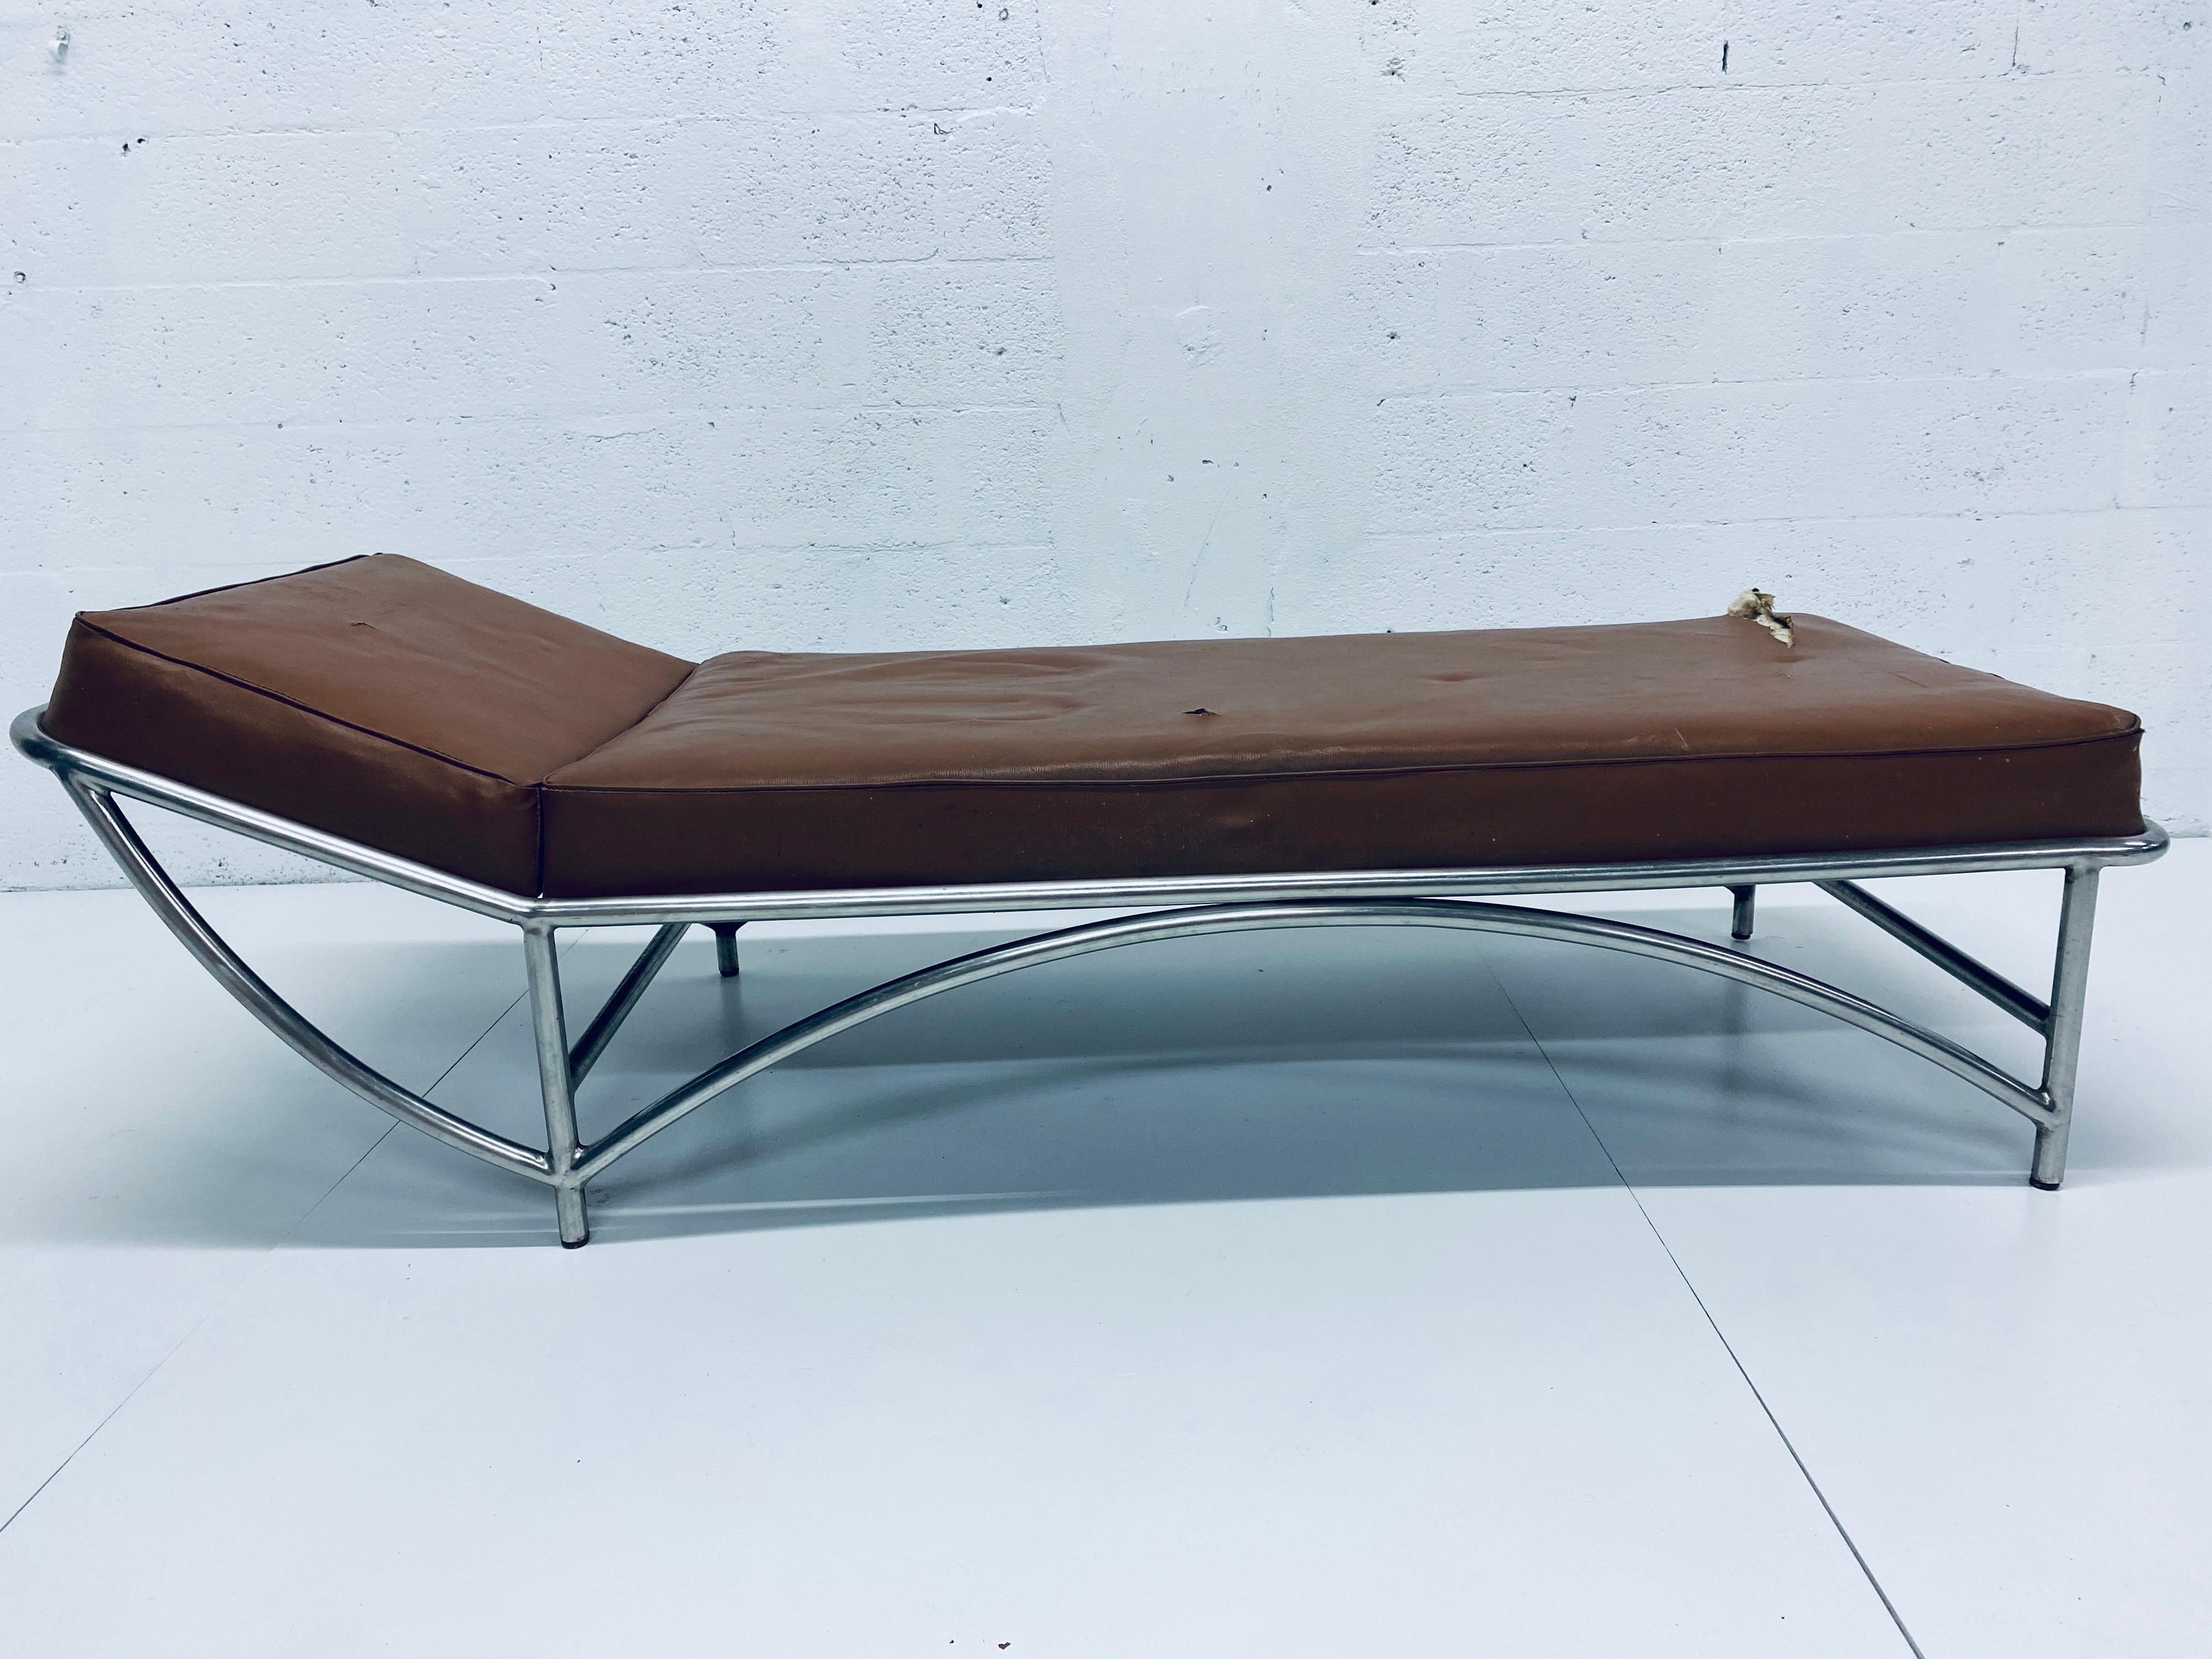 Rare Heywood Wakefield Art Deco Revival streamline chaise lounge or daybed with cushioned seat and back on tubular steel frame. Fabric is original and will need new upholstery. The design is similar to KEM Weber.